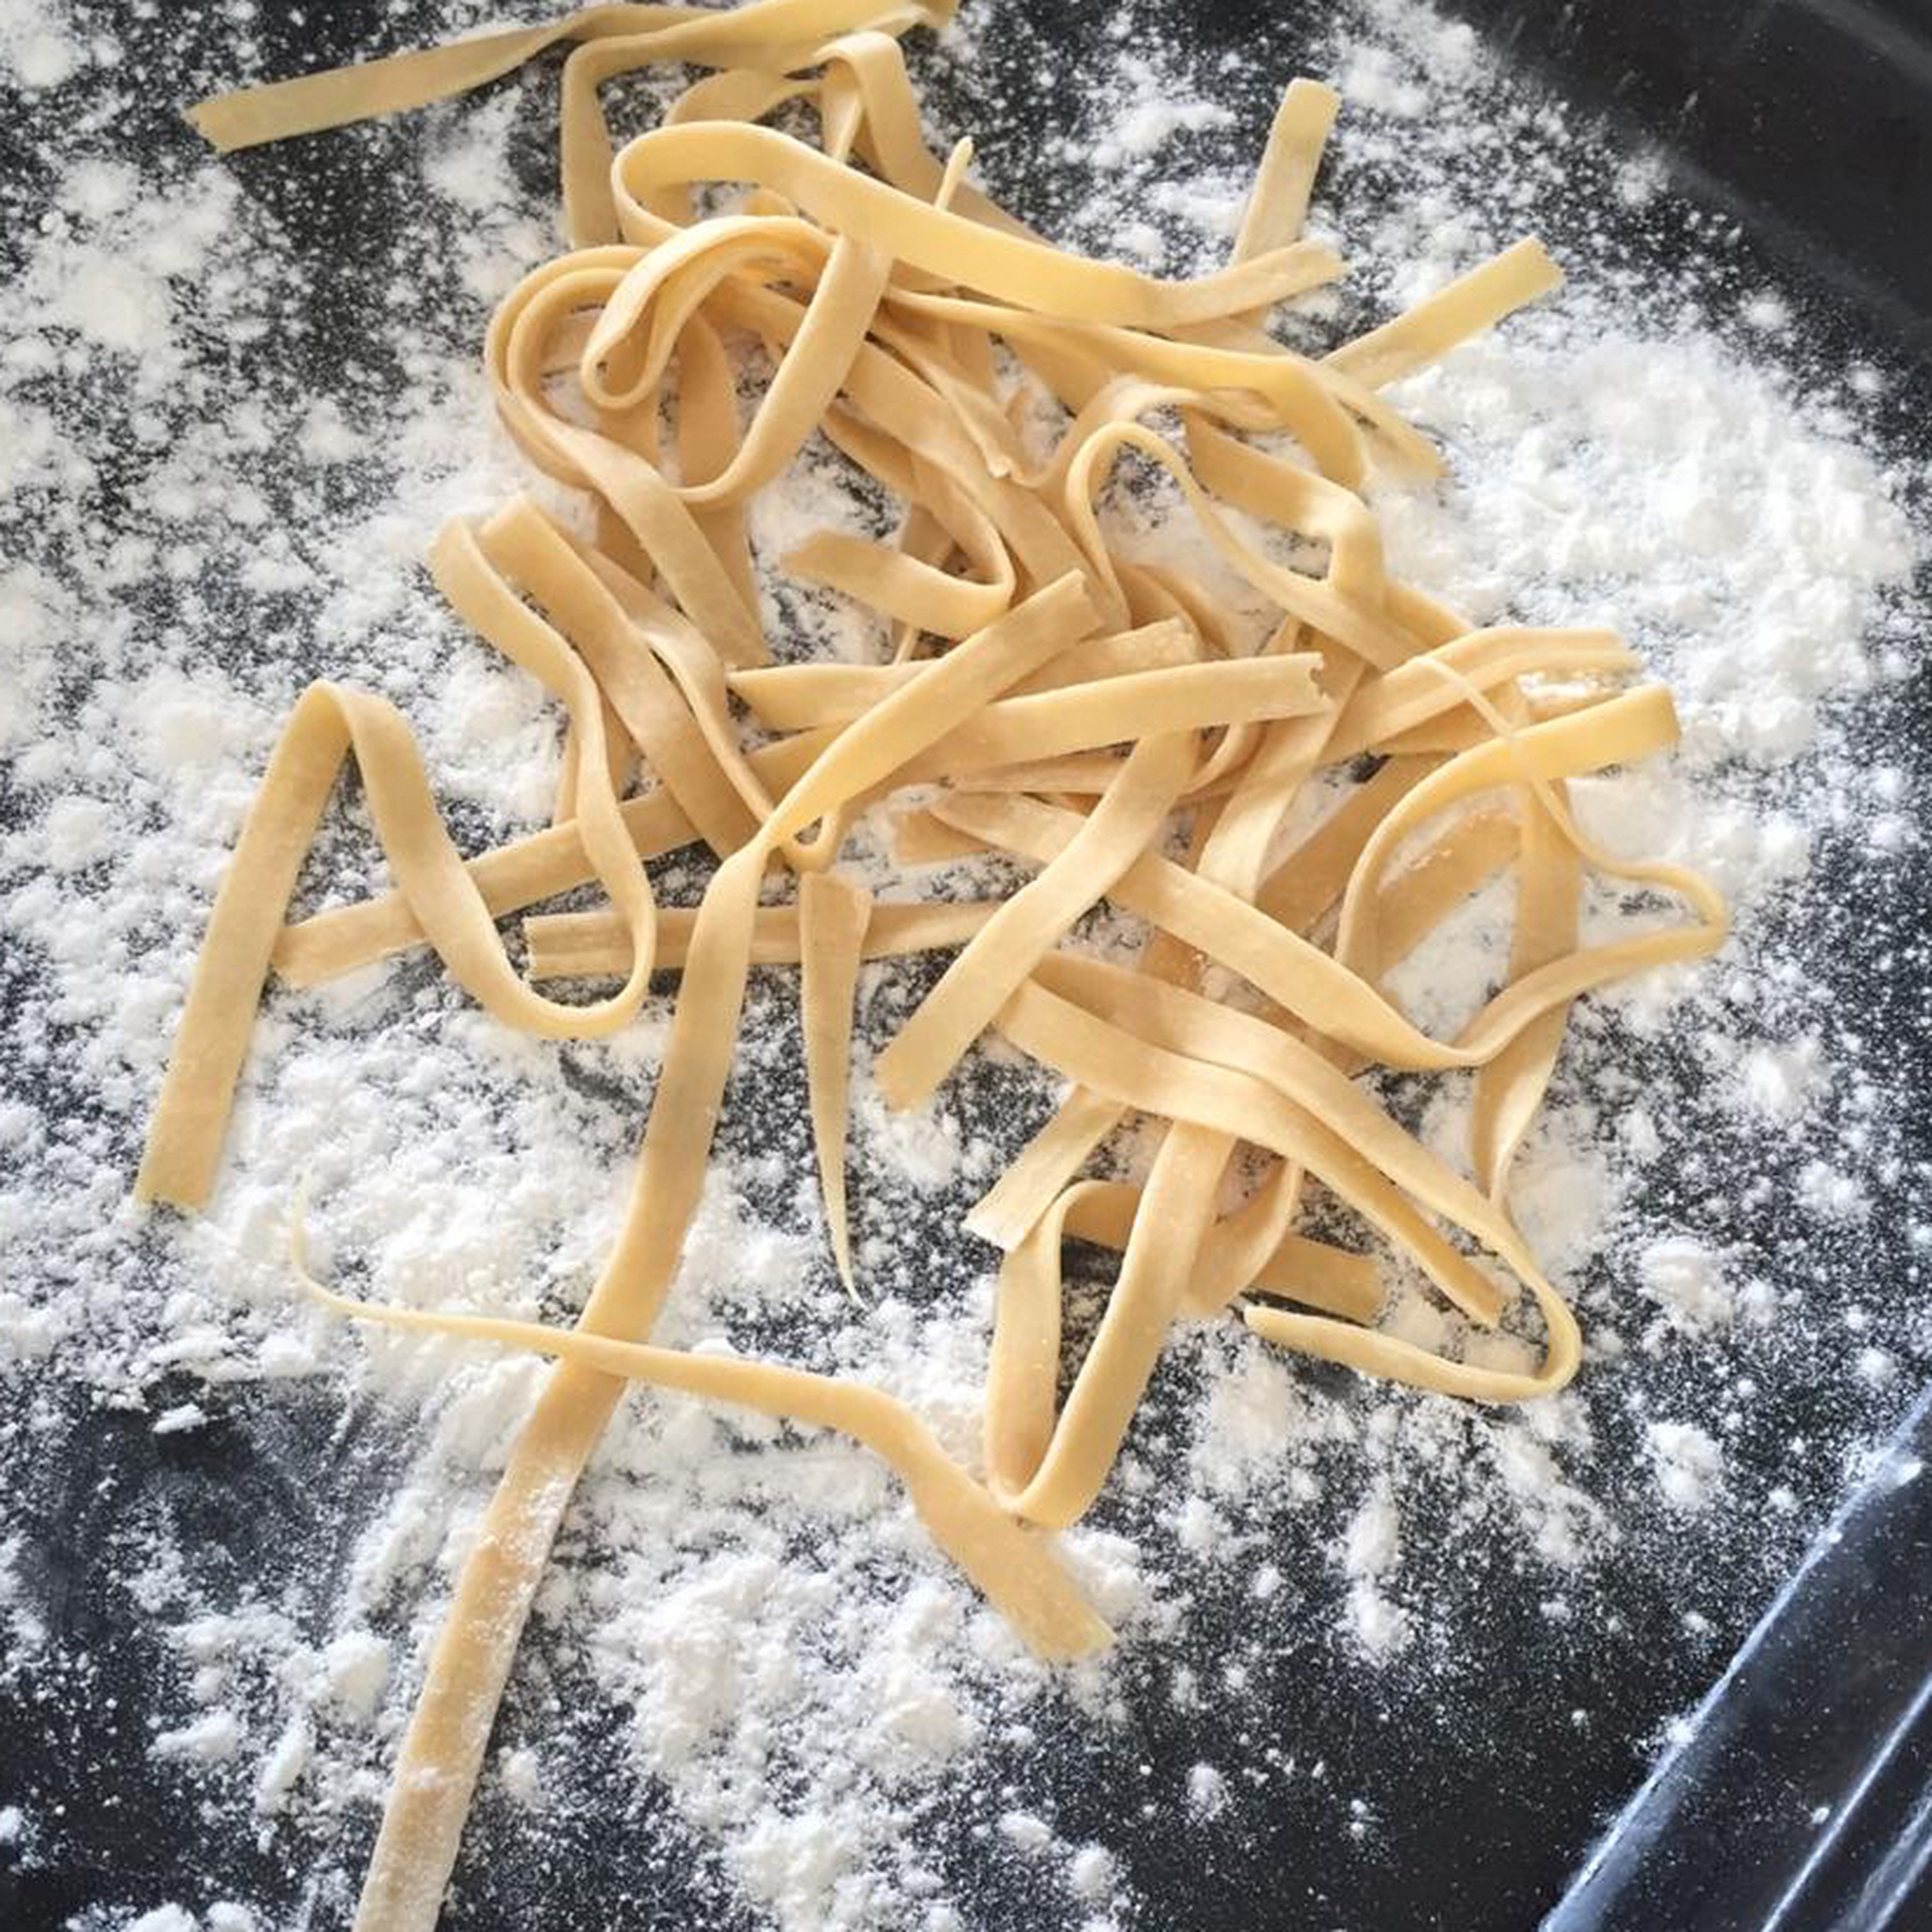 dust a pan with a bit of flour and toss the pasta into it. Make sure to coat the pasta with flour as well, to prevent it to stick to itself. (Quick tip: if your dough is more on the sticky side, you might need to coat it with flour while rolling it)